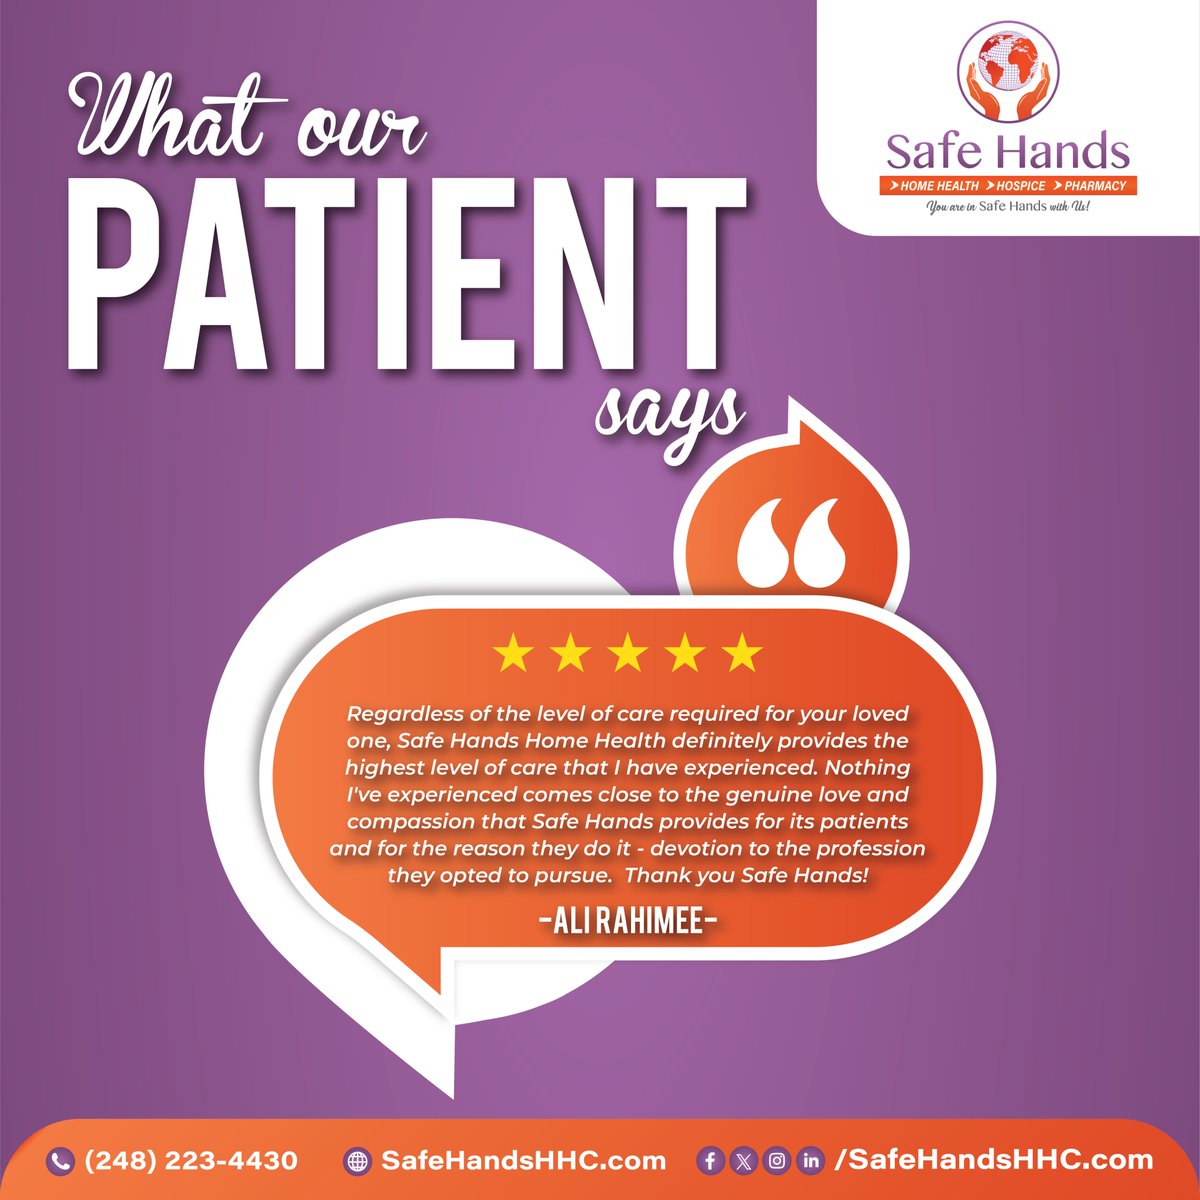 Hear it from those who know us best, Our patients! 🌟 Ali Rahimee's journey to better health speaks volumes about the care we provide.

Feel free to contact us now: +1 (248) 223-4430
or
Visit us: safehandshhc.com
#PatientTestimonial #homehealthcare #SafeHandsHHC #Michigan